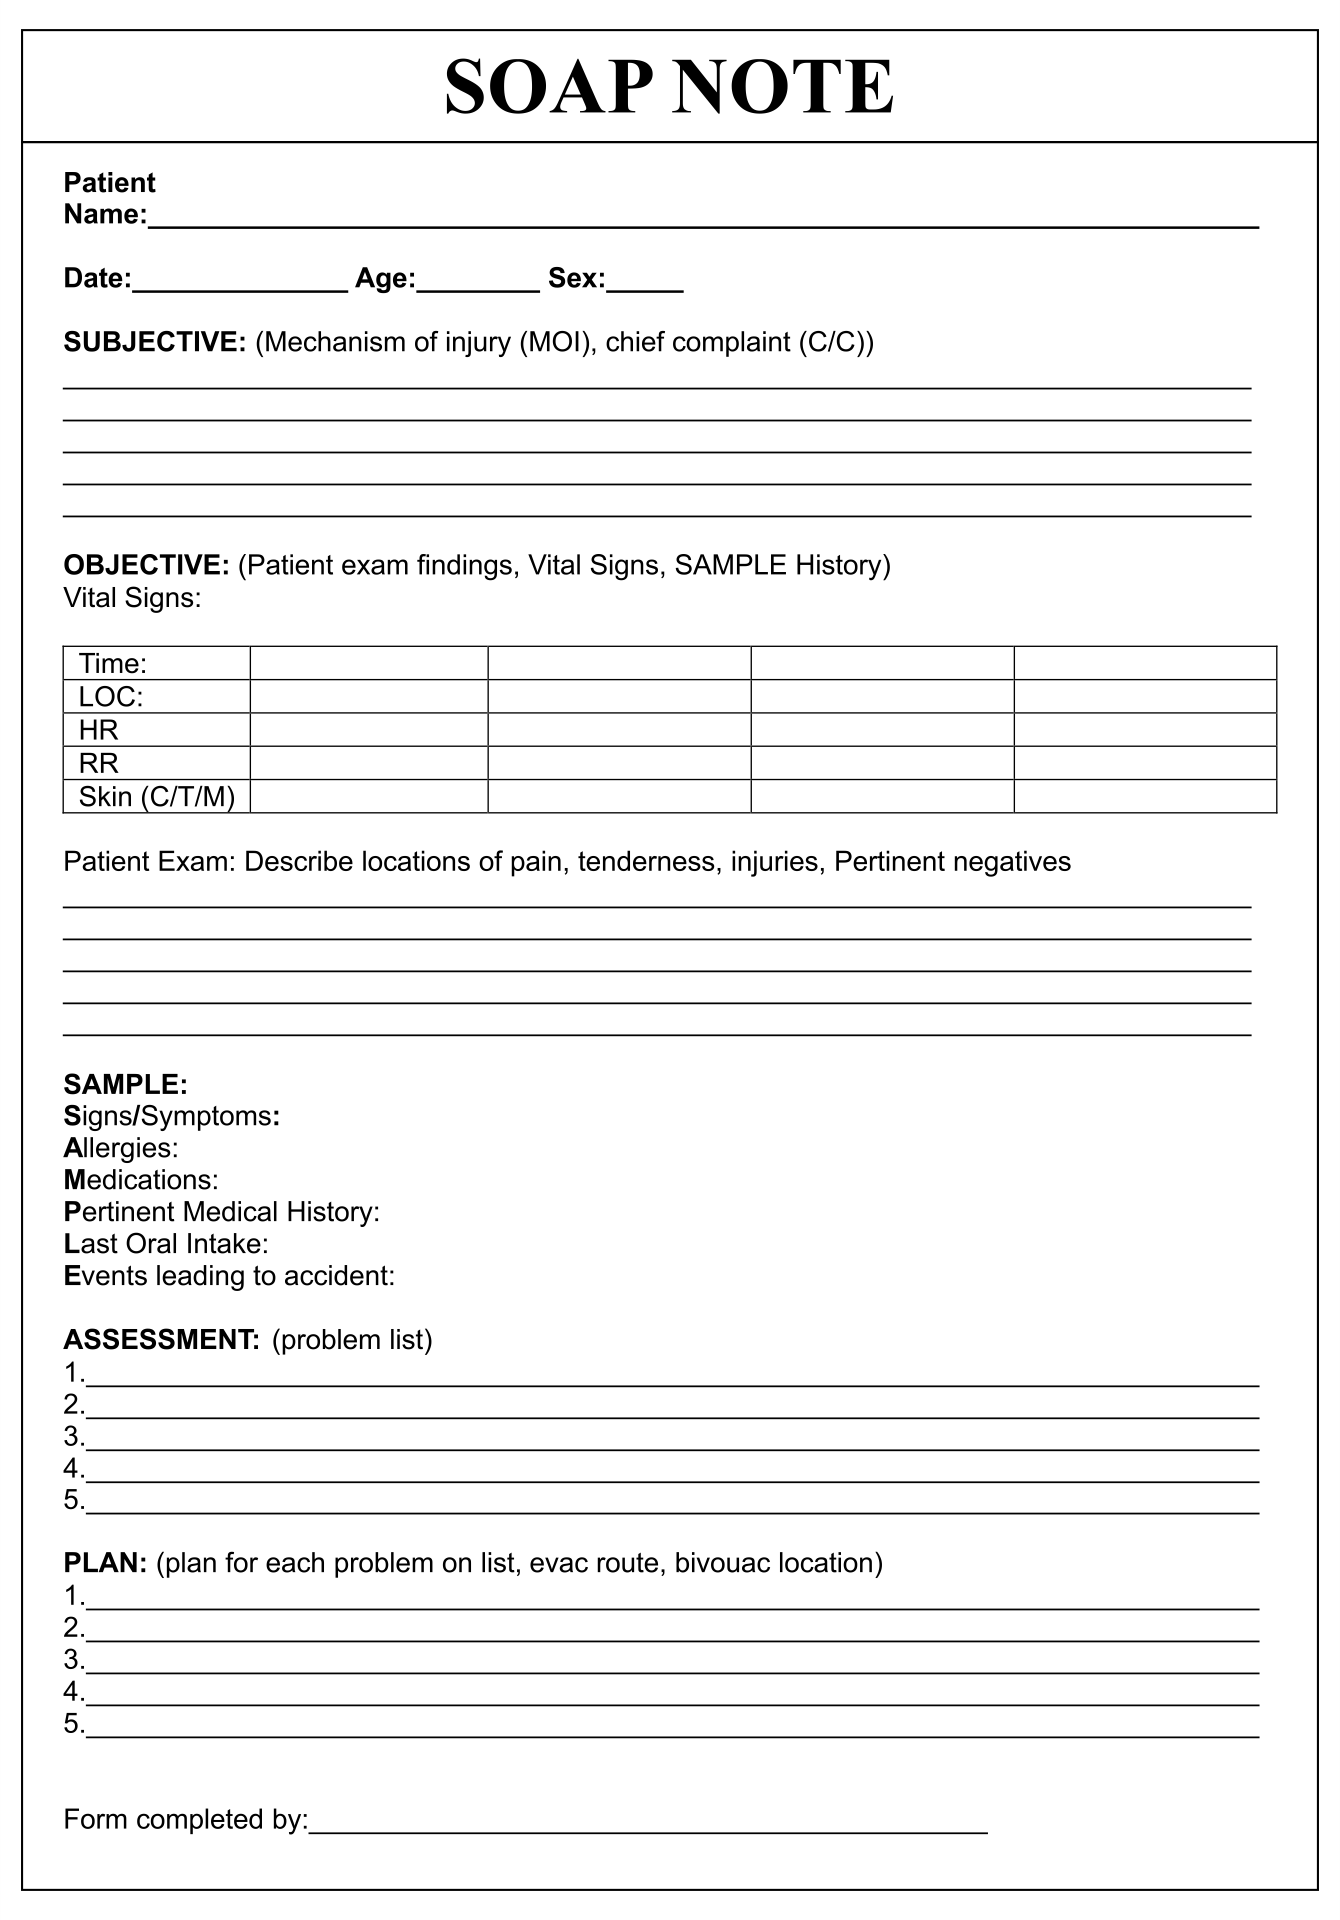 printable-soap-note-template